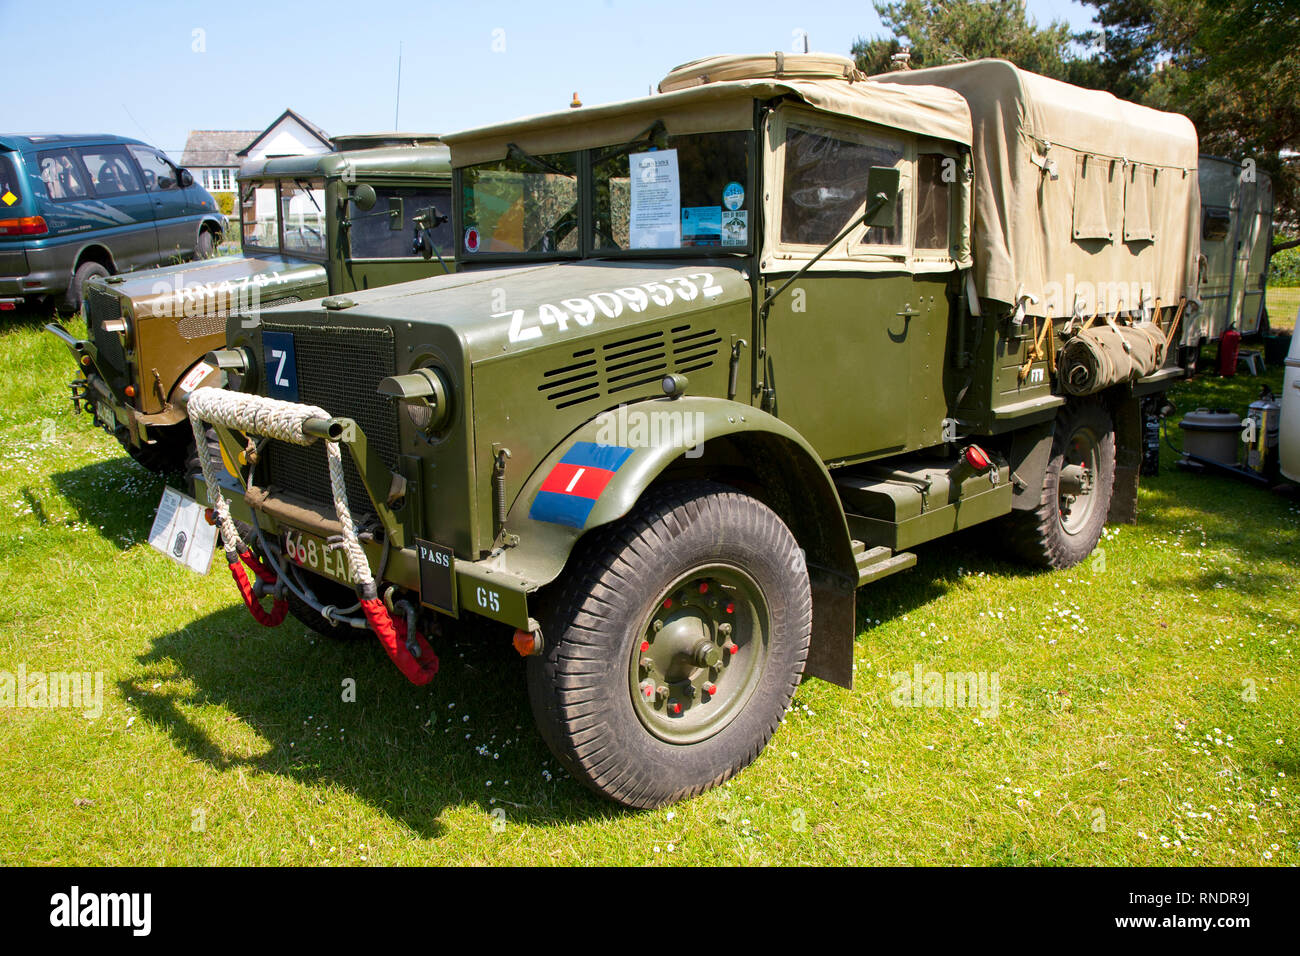 Camion militare, UK, Inghilterra, l'Isola di Wight, Yarmouth, Marching Band, Buskers, Old Gaffers Festival, Classic Cars, mostre, la folla di persone Foto Stock